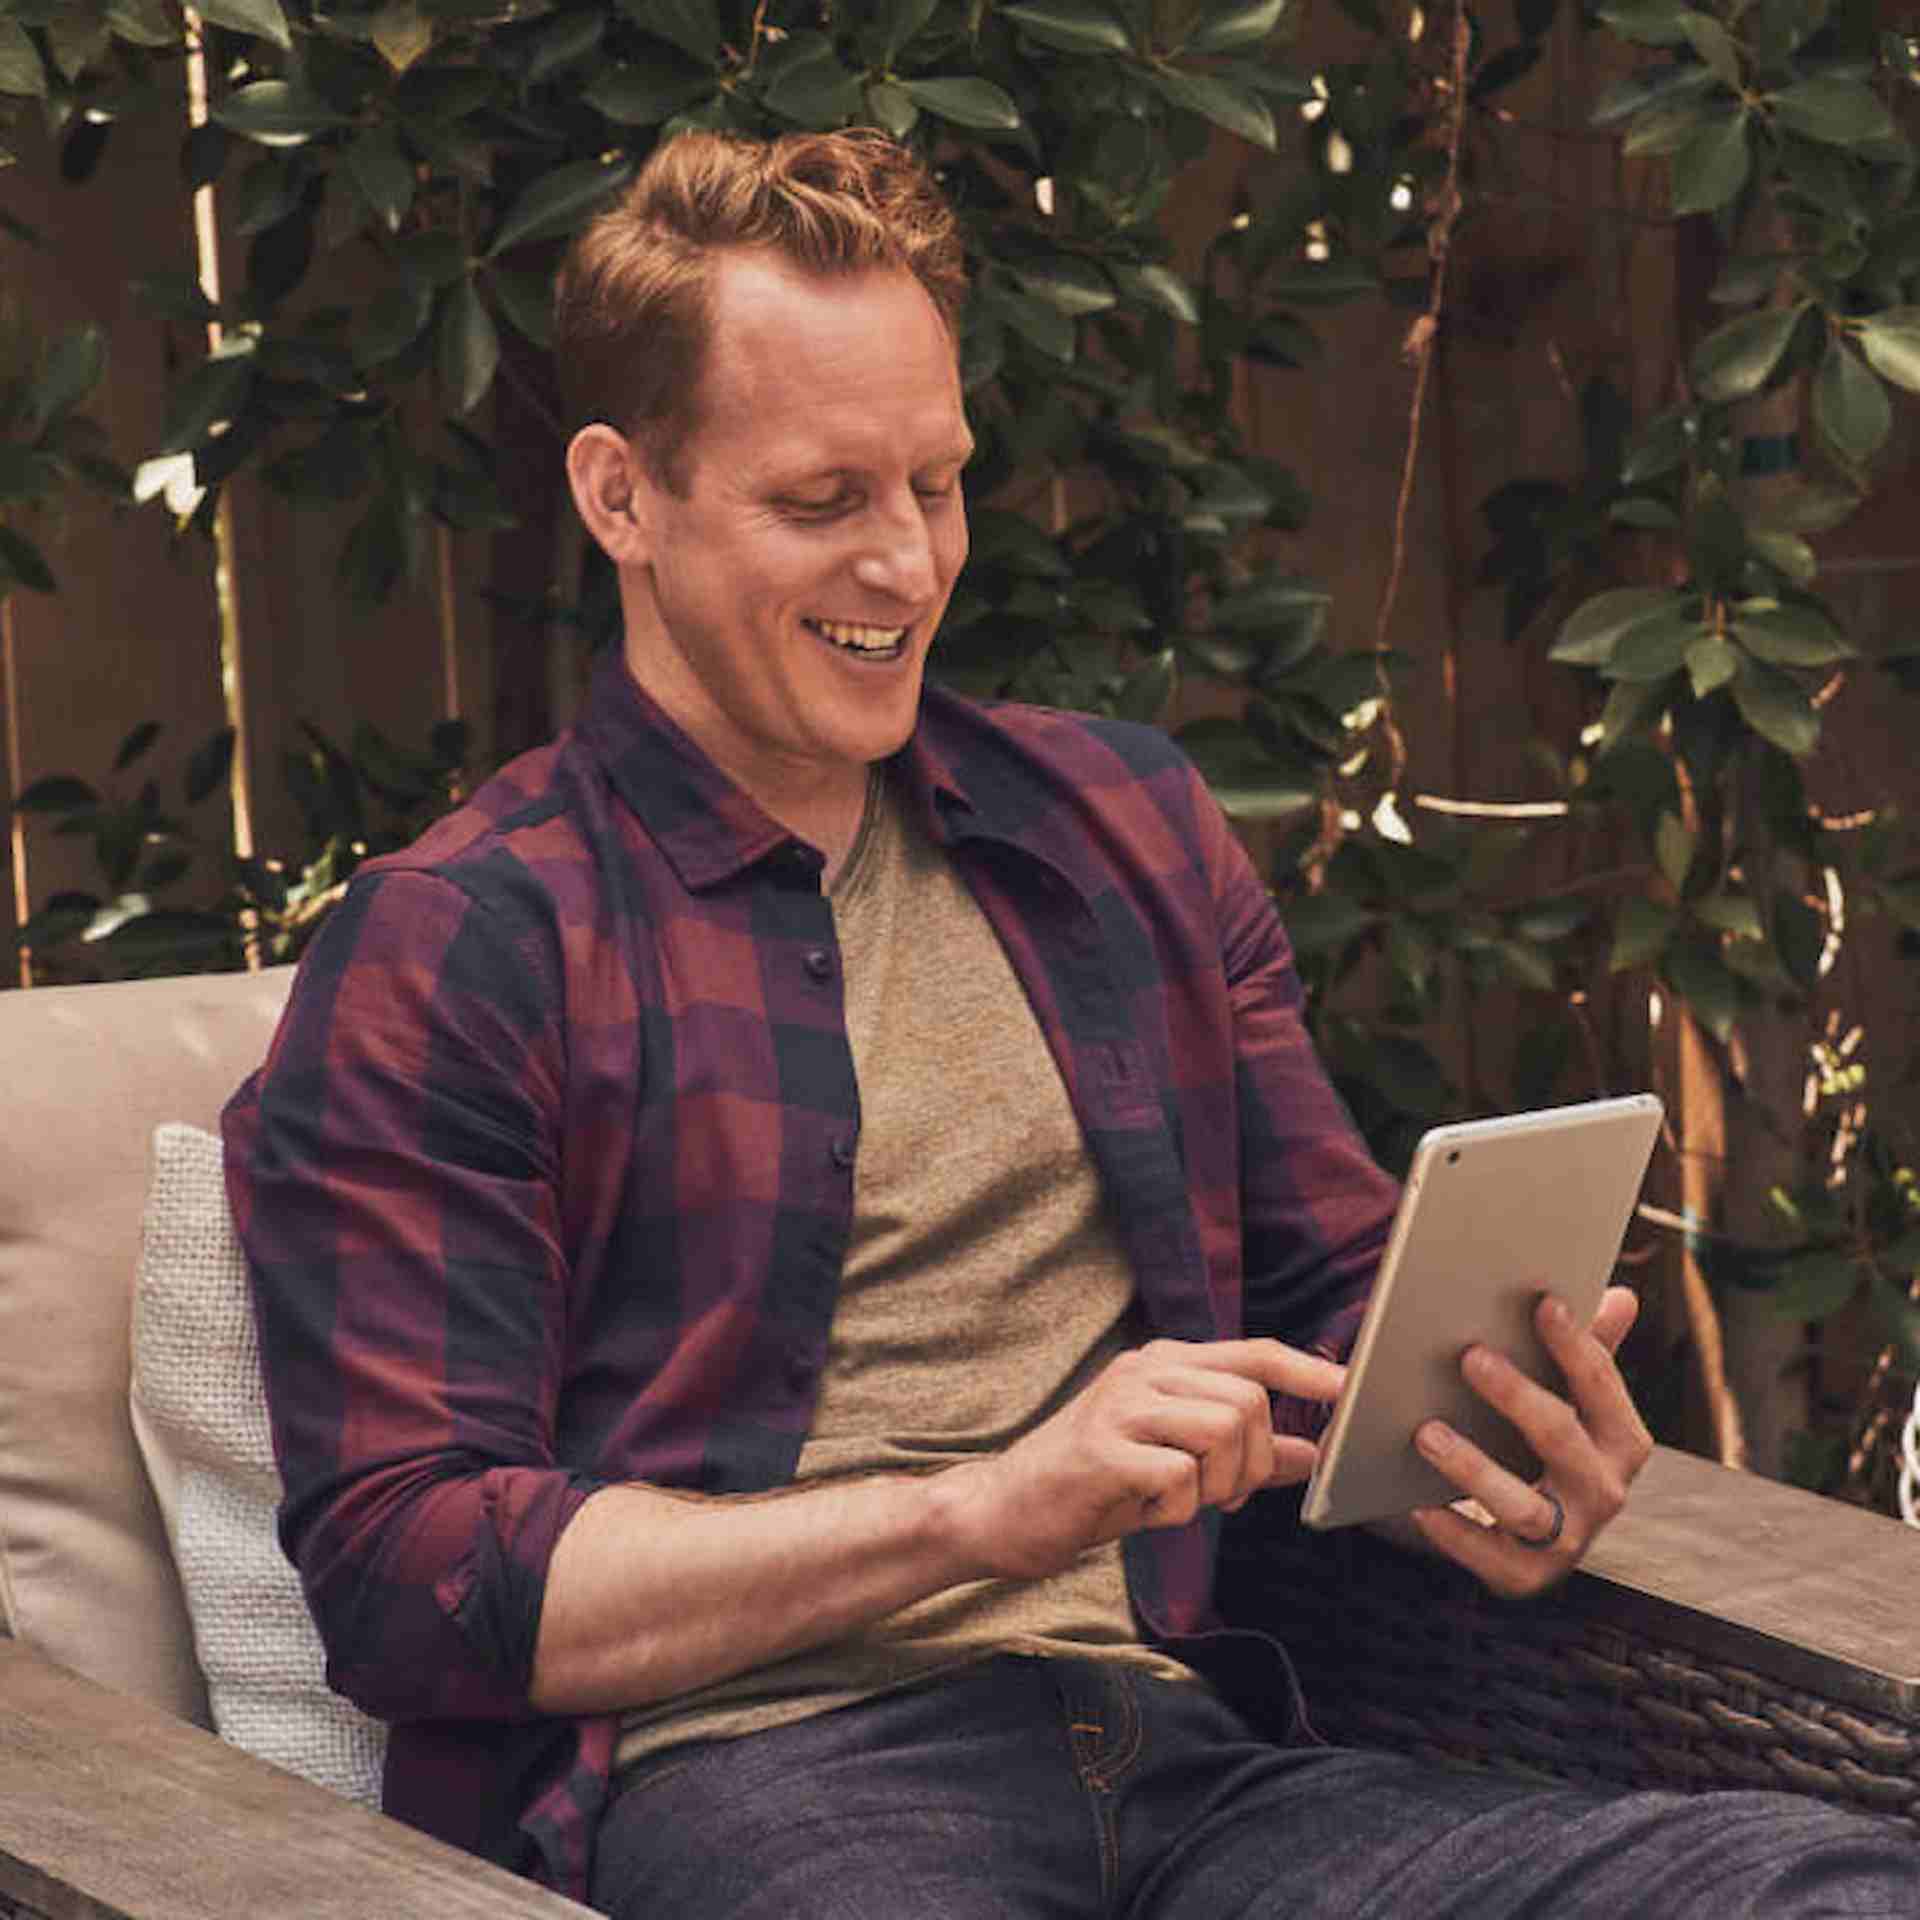 Male in flannel shirt sitting outside using tablet